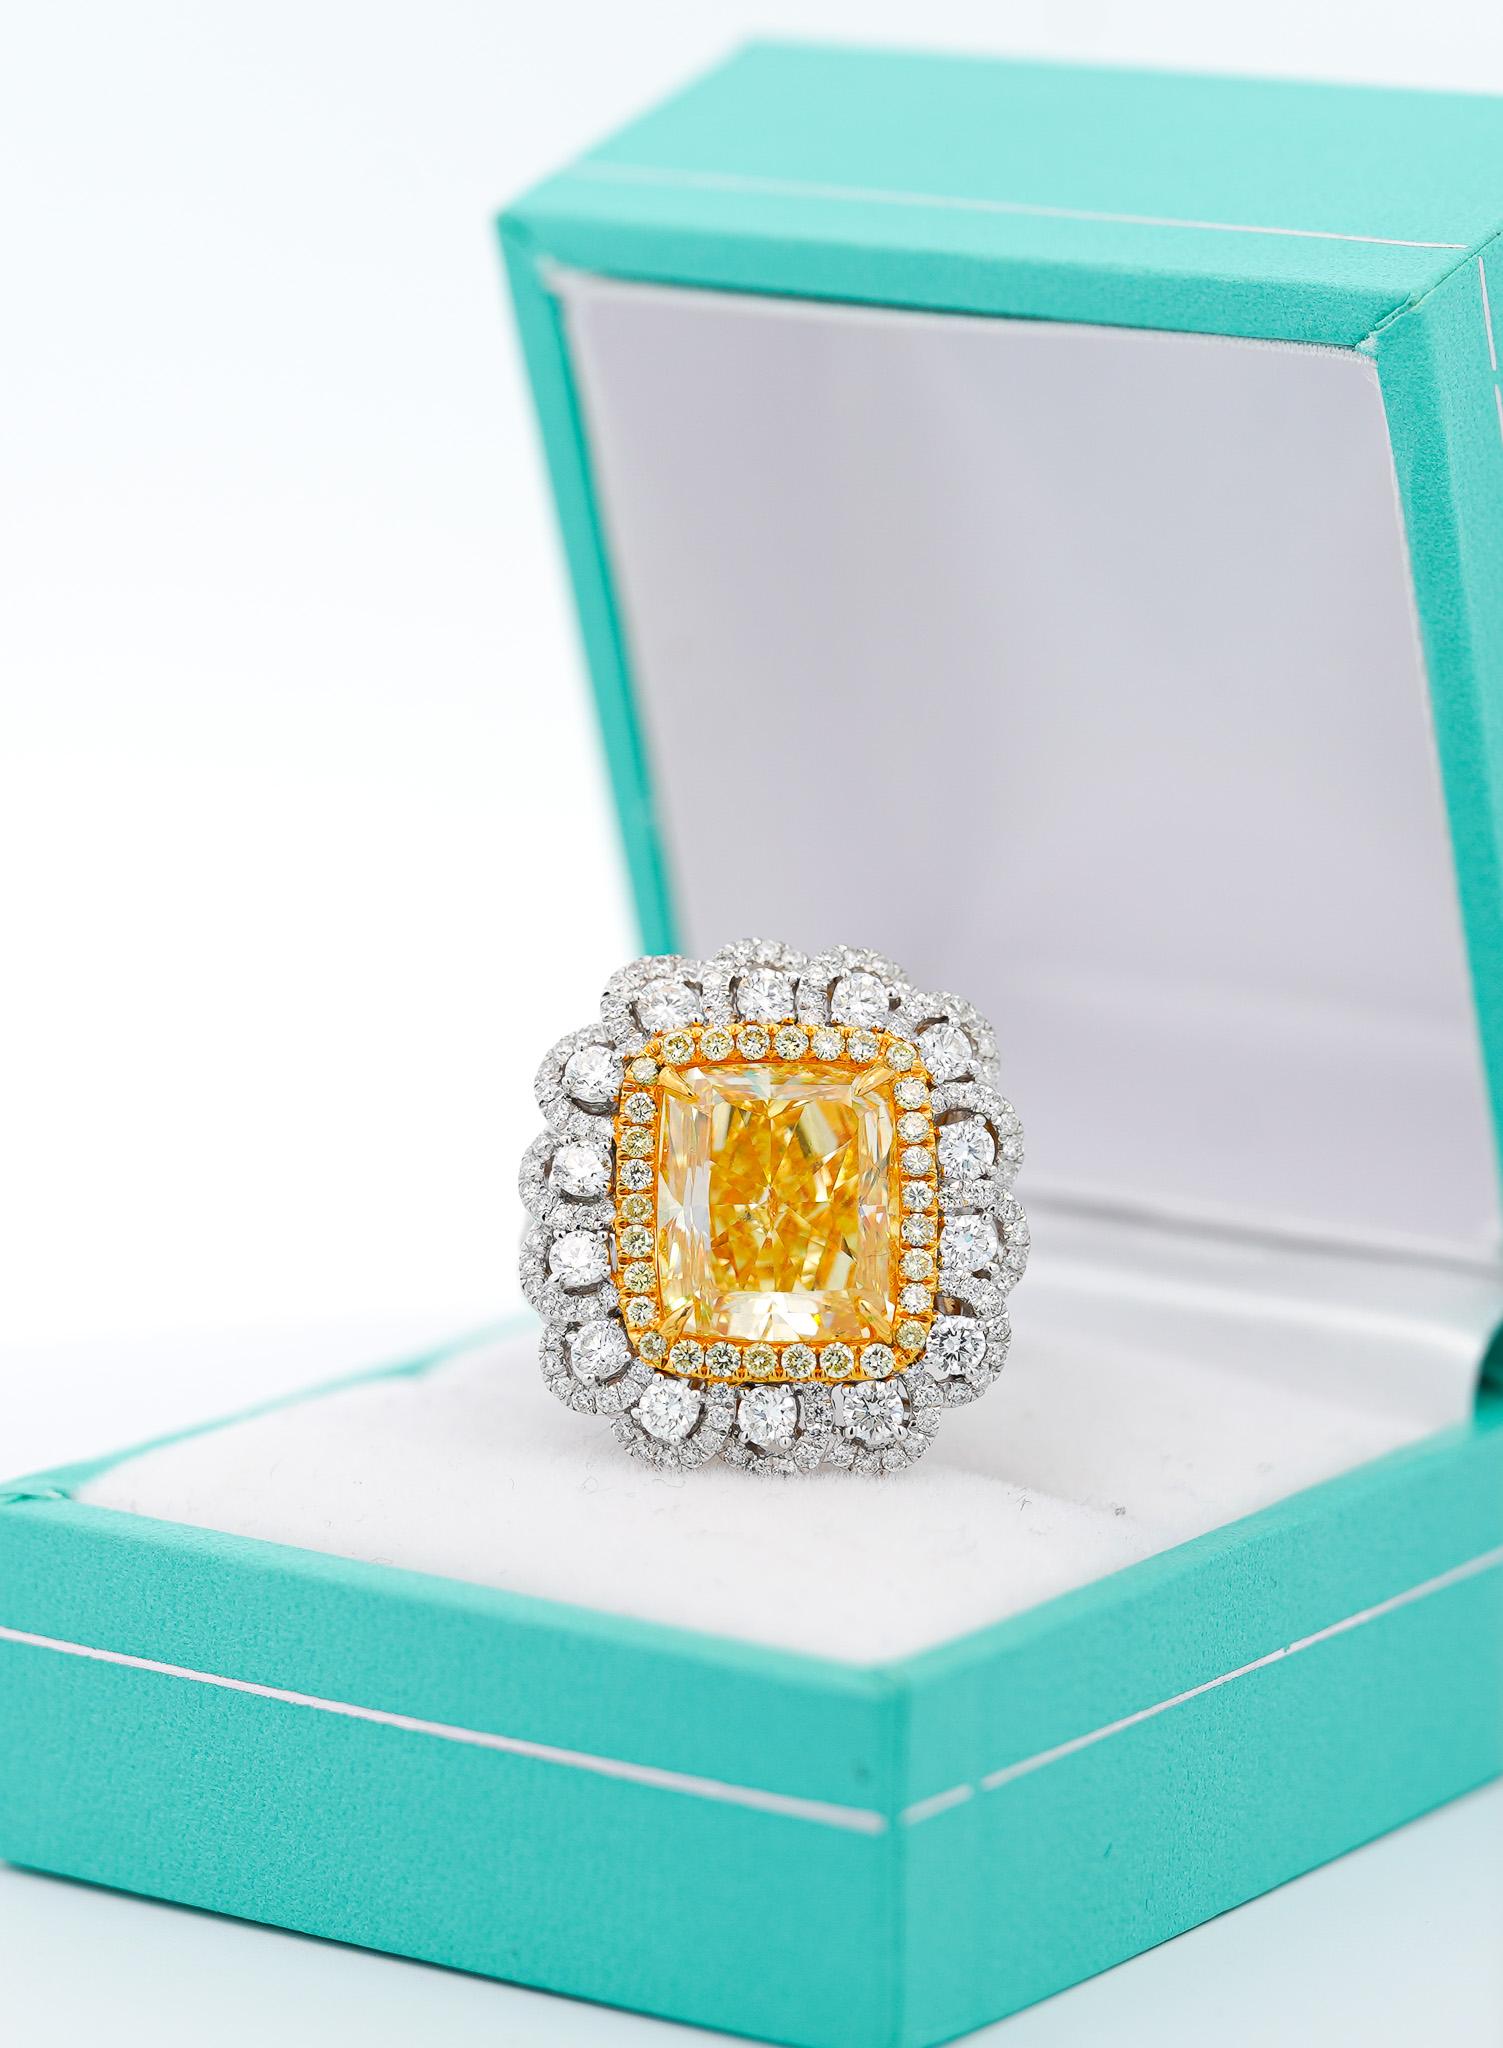 7 carat fancy intense yellow radiant cut diamond set with over 2 carats in white and yellow diamonds. The diamond accents are gracefully made in a curved floral motif design. The ring setting is made in 18 karat white and yellow gold with an open